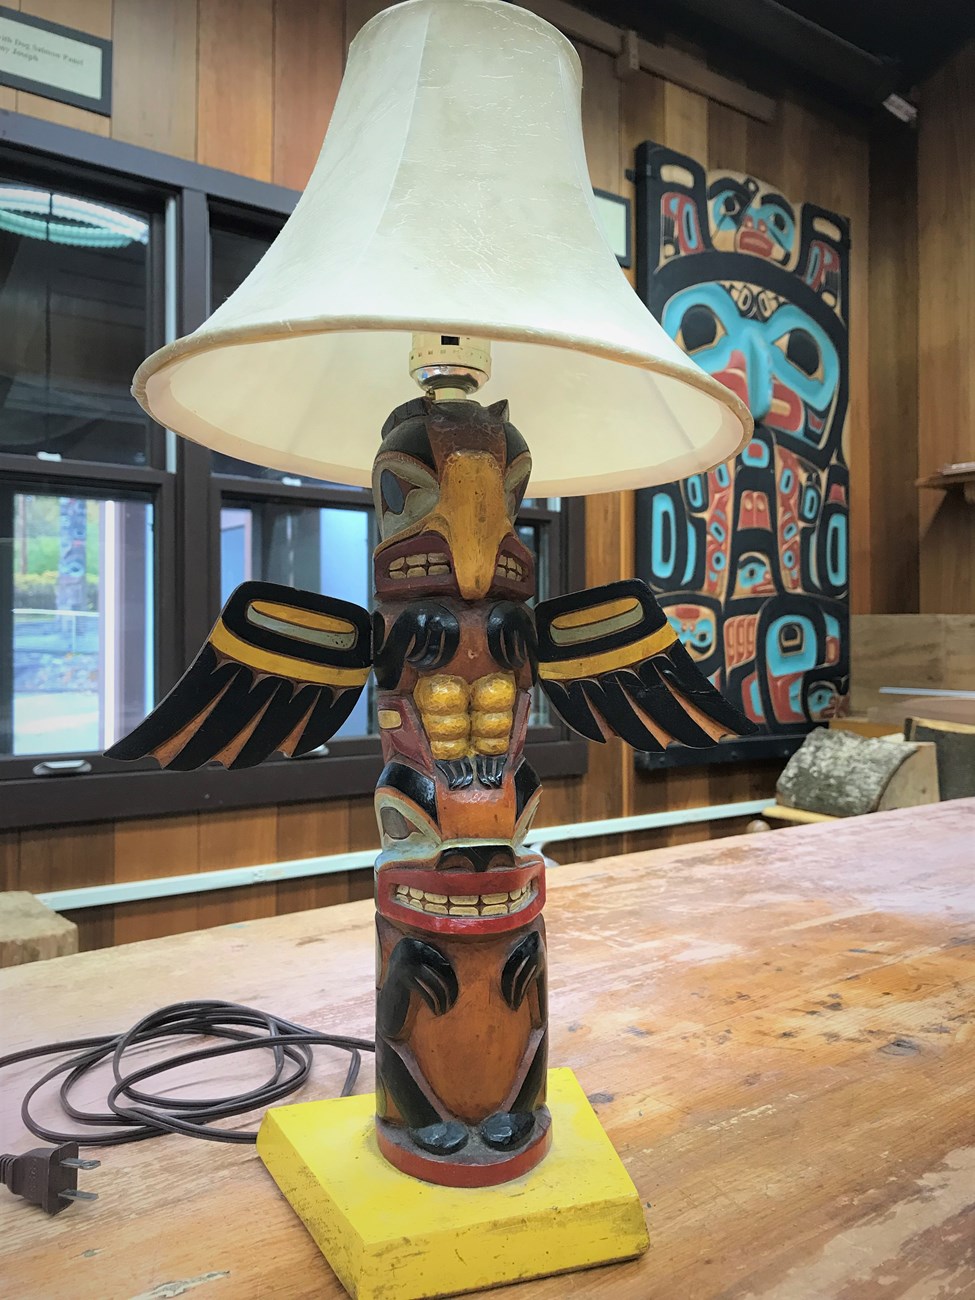 A Table lamp carved to resemble a totem pole with an eagle and a bear represented.